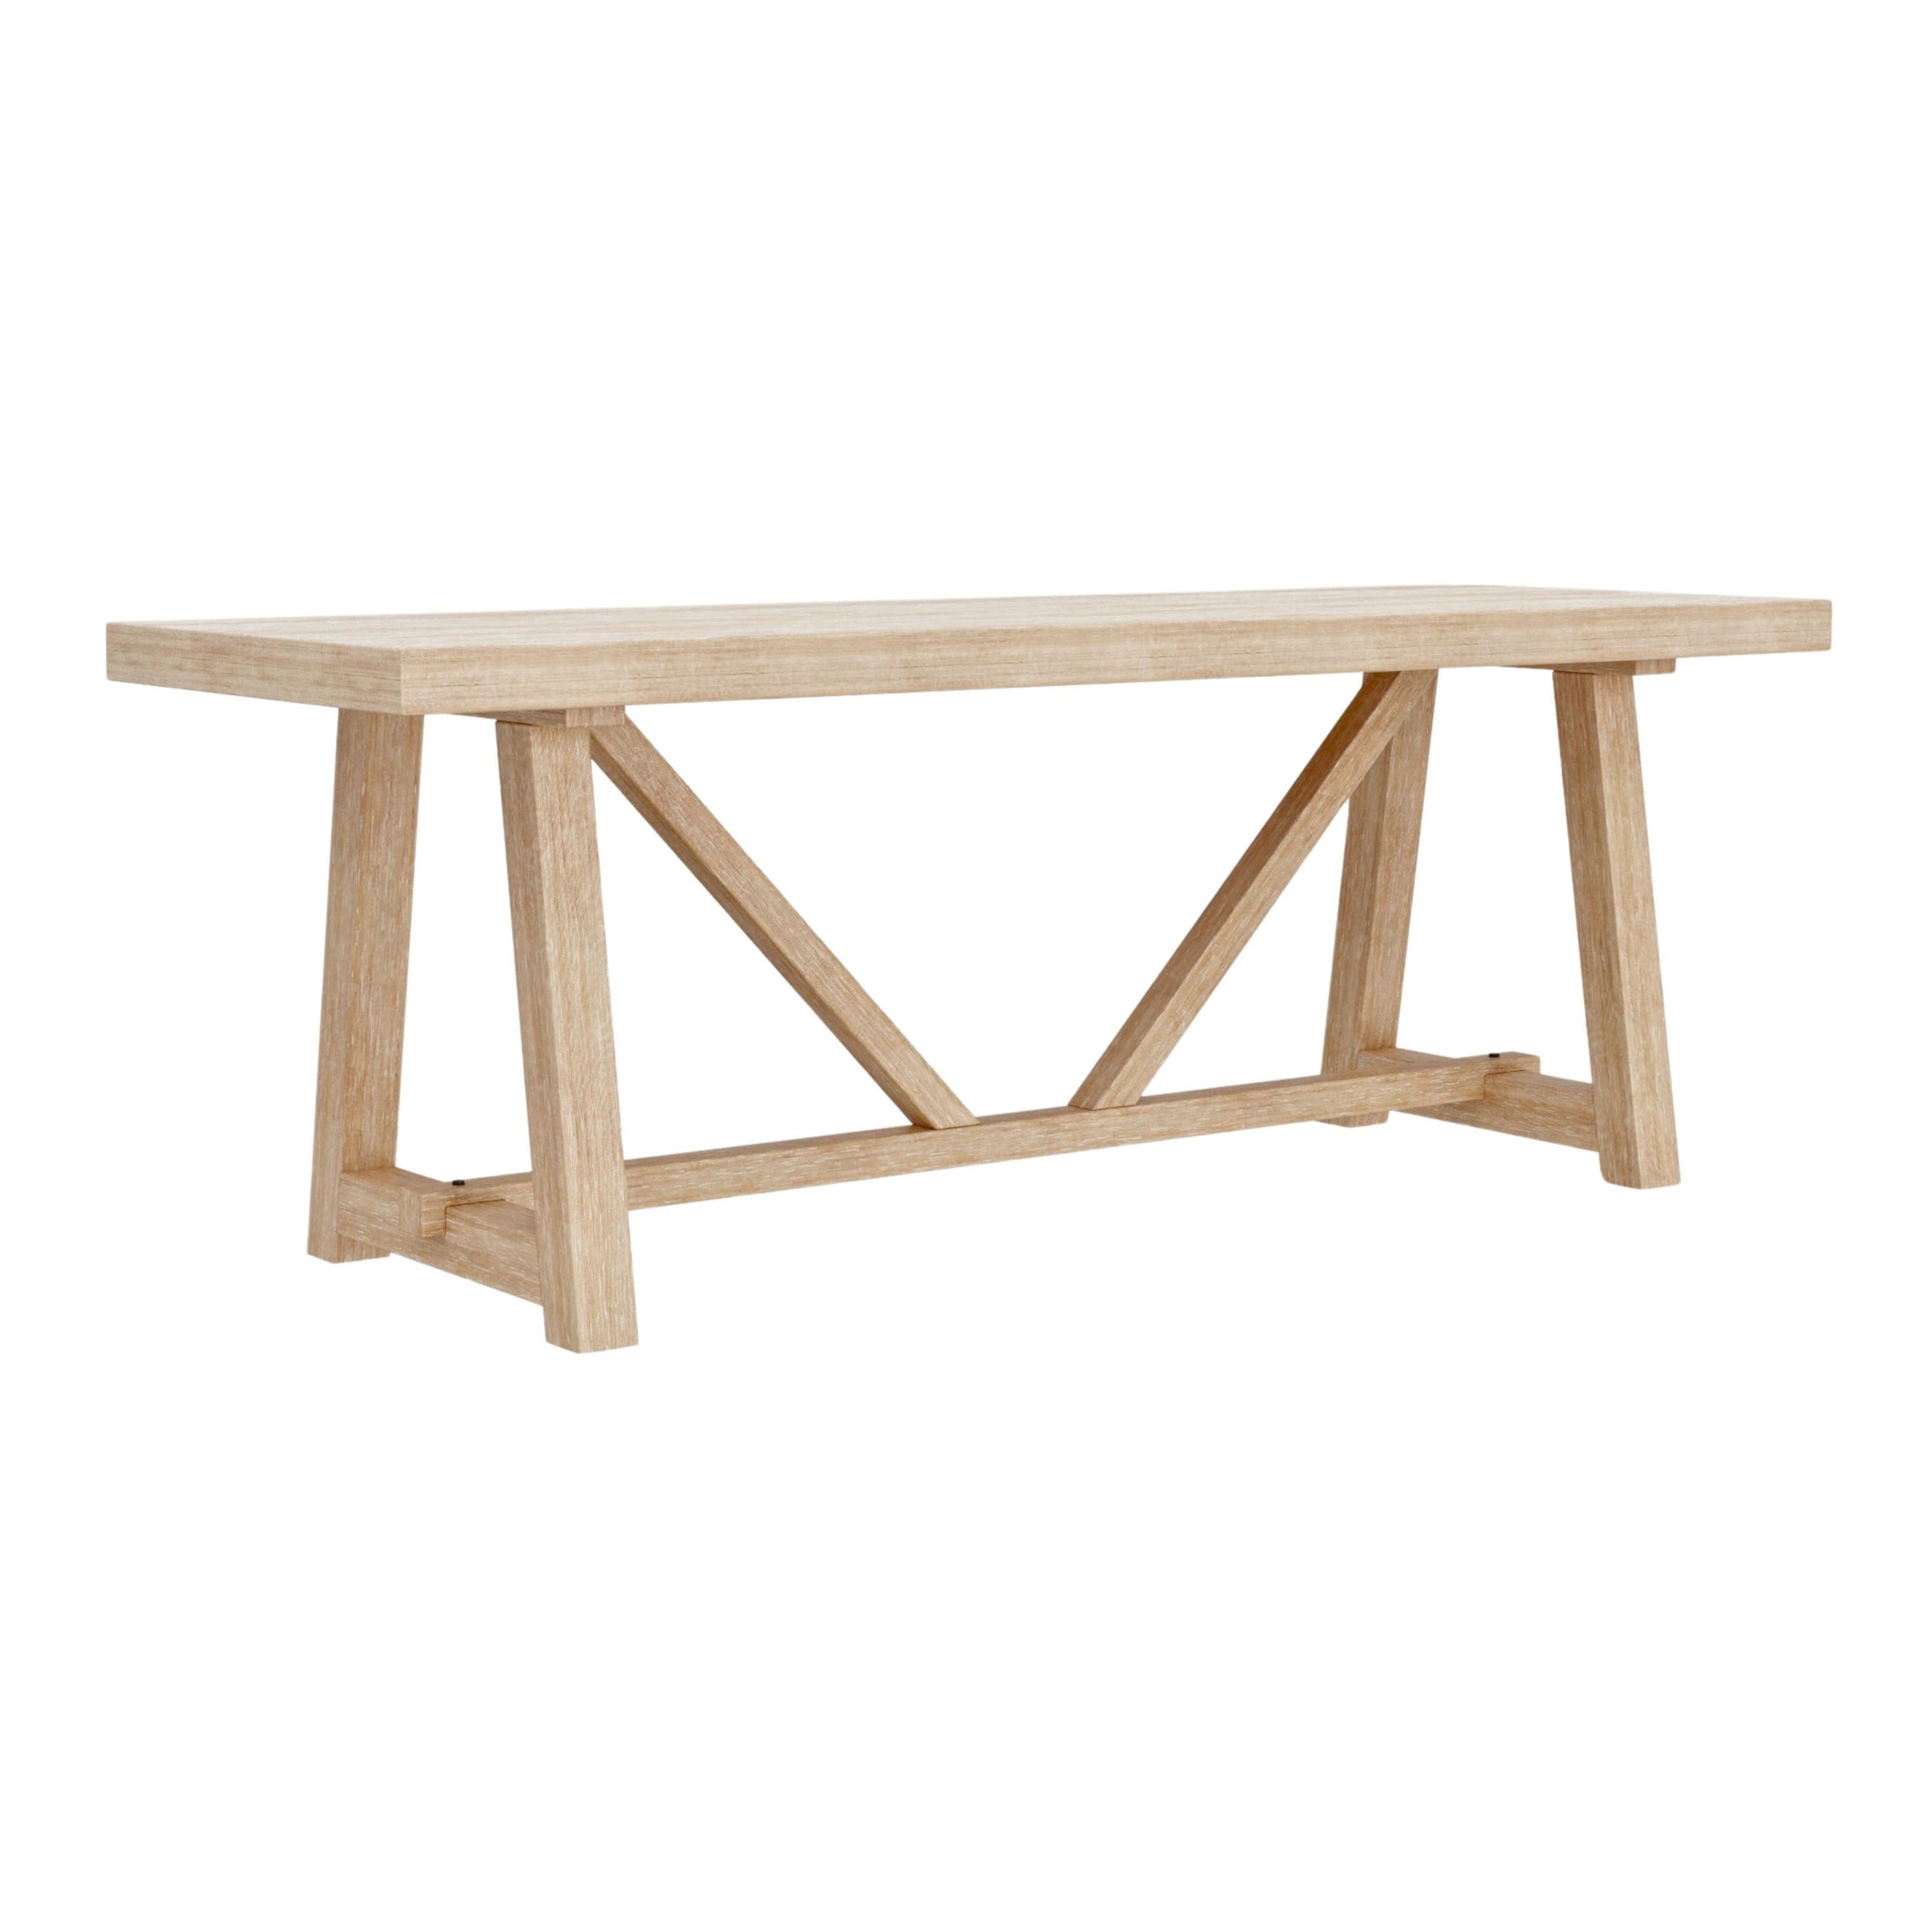 Bicknell Natural Wood Trestle Dining Table | World Market